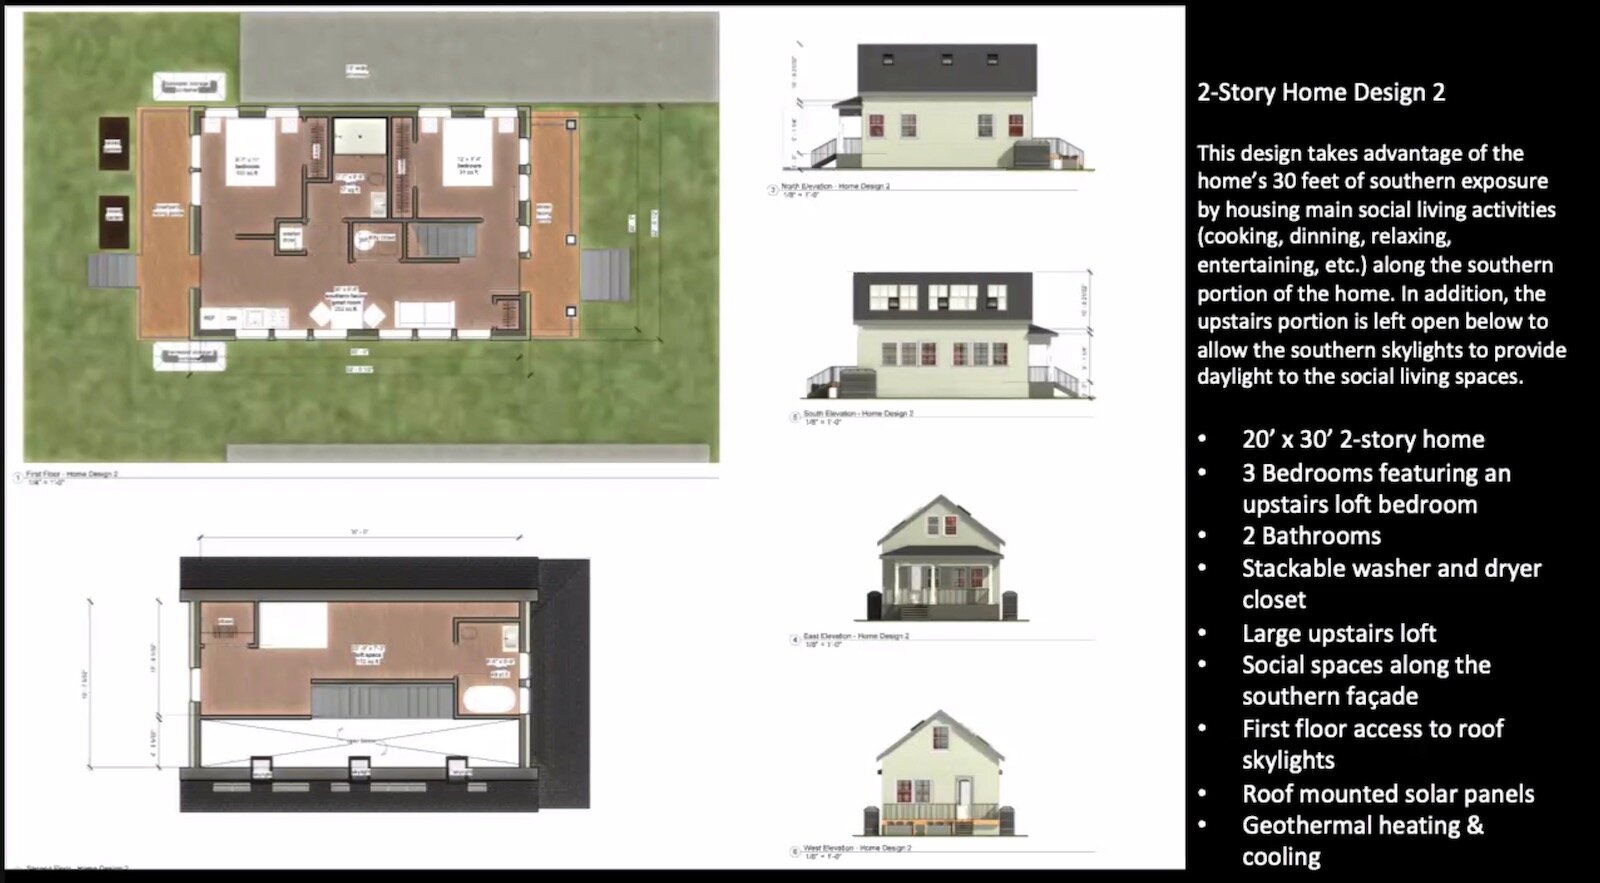 Plans by Home Start architect Kenyotta Brown, for the project's two-story homes. (Image from Home Start, shown as part of the Housing Matters online forum.)